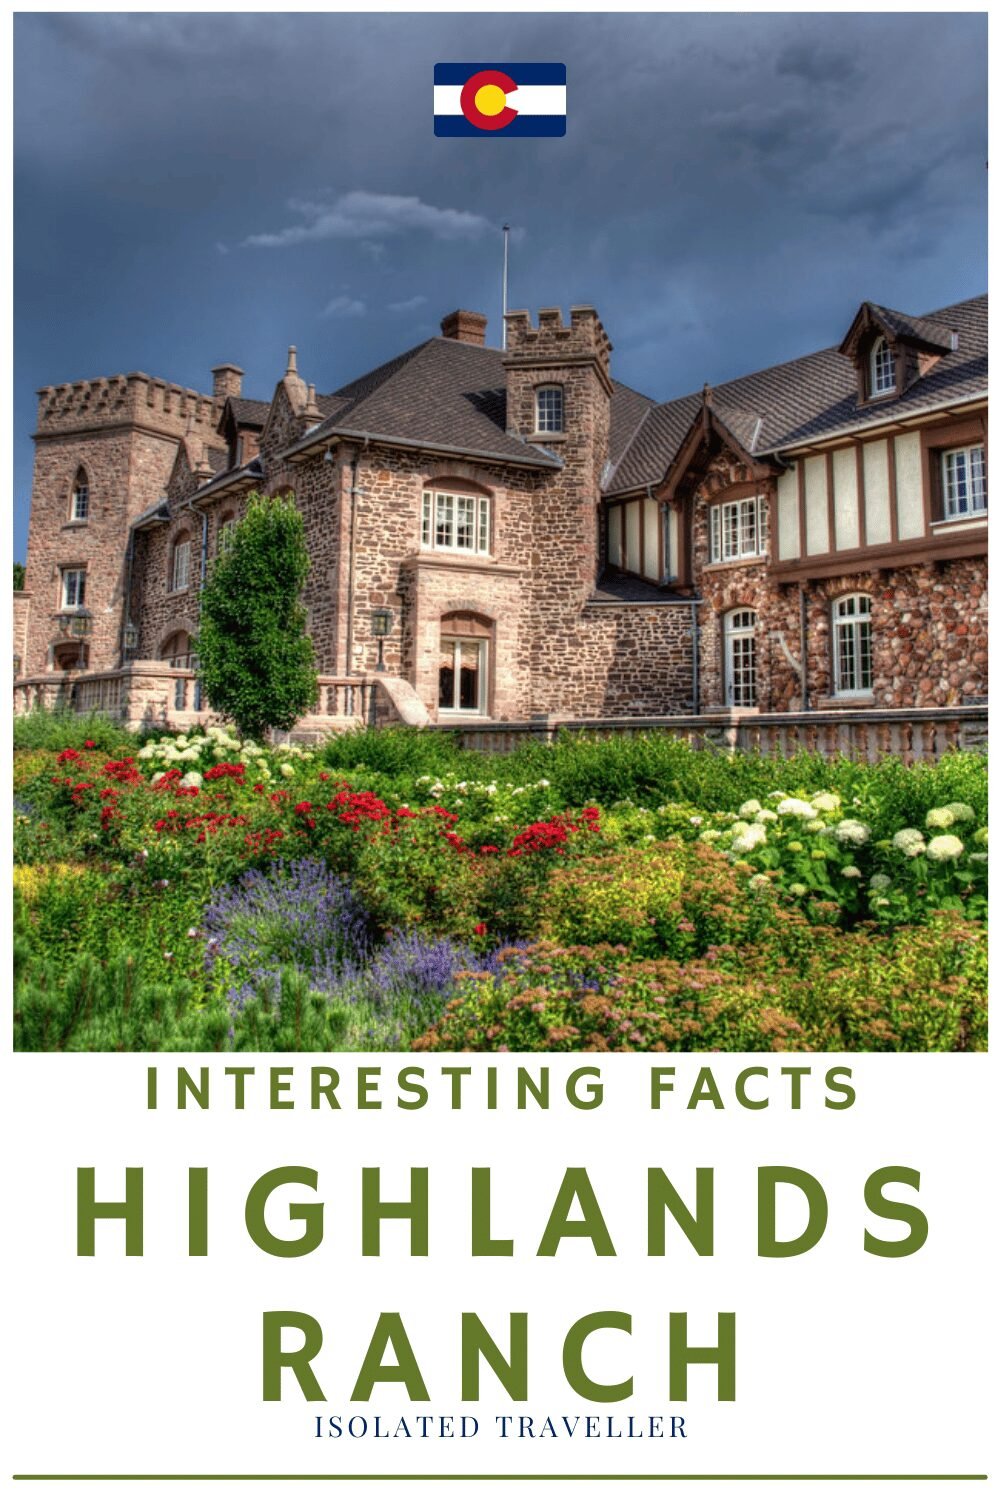 Facts About Highlands Ranch